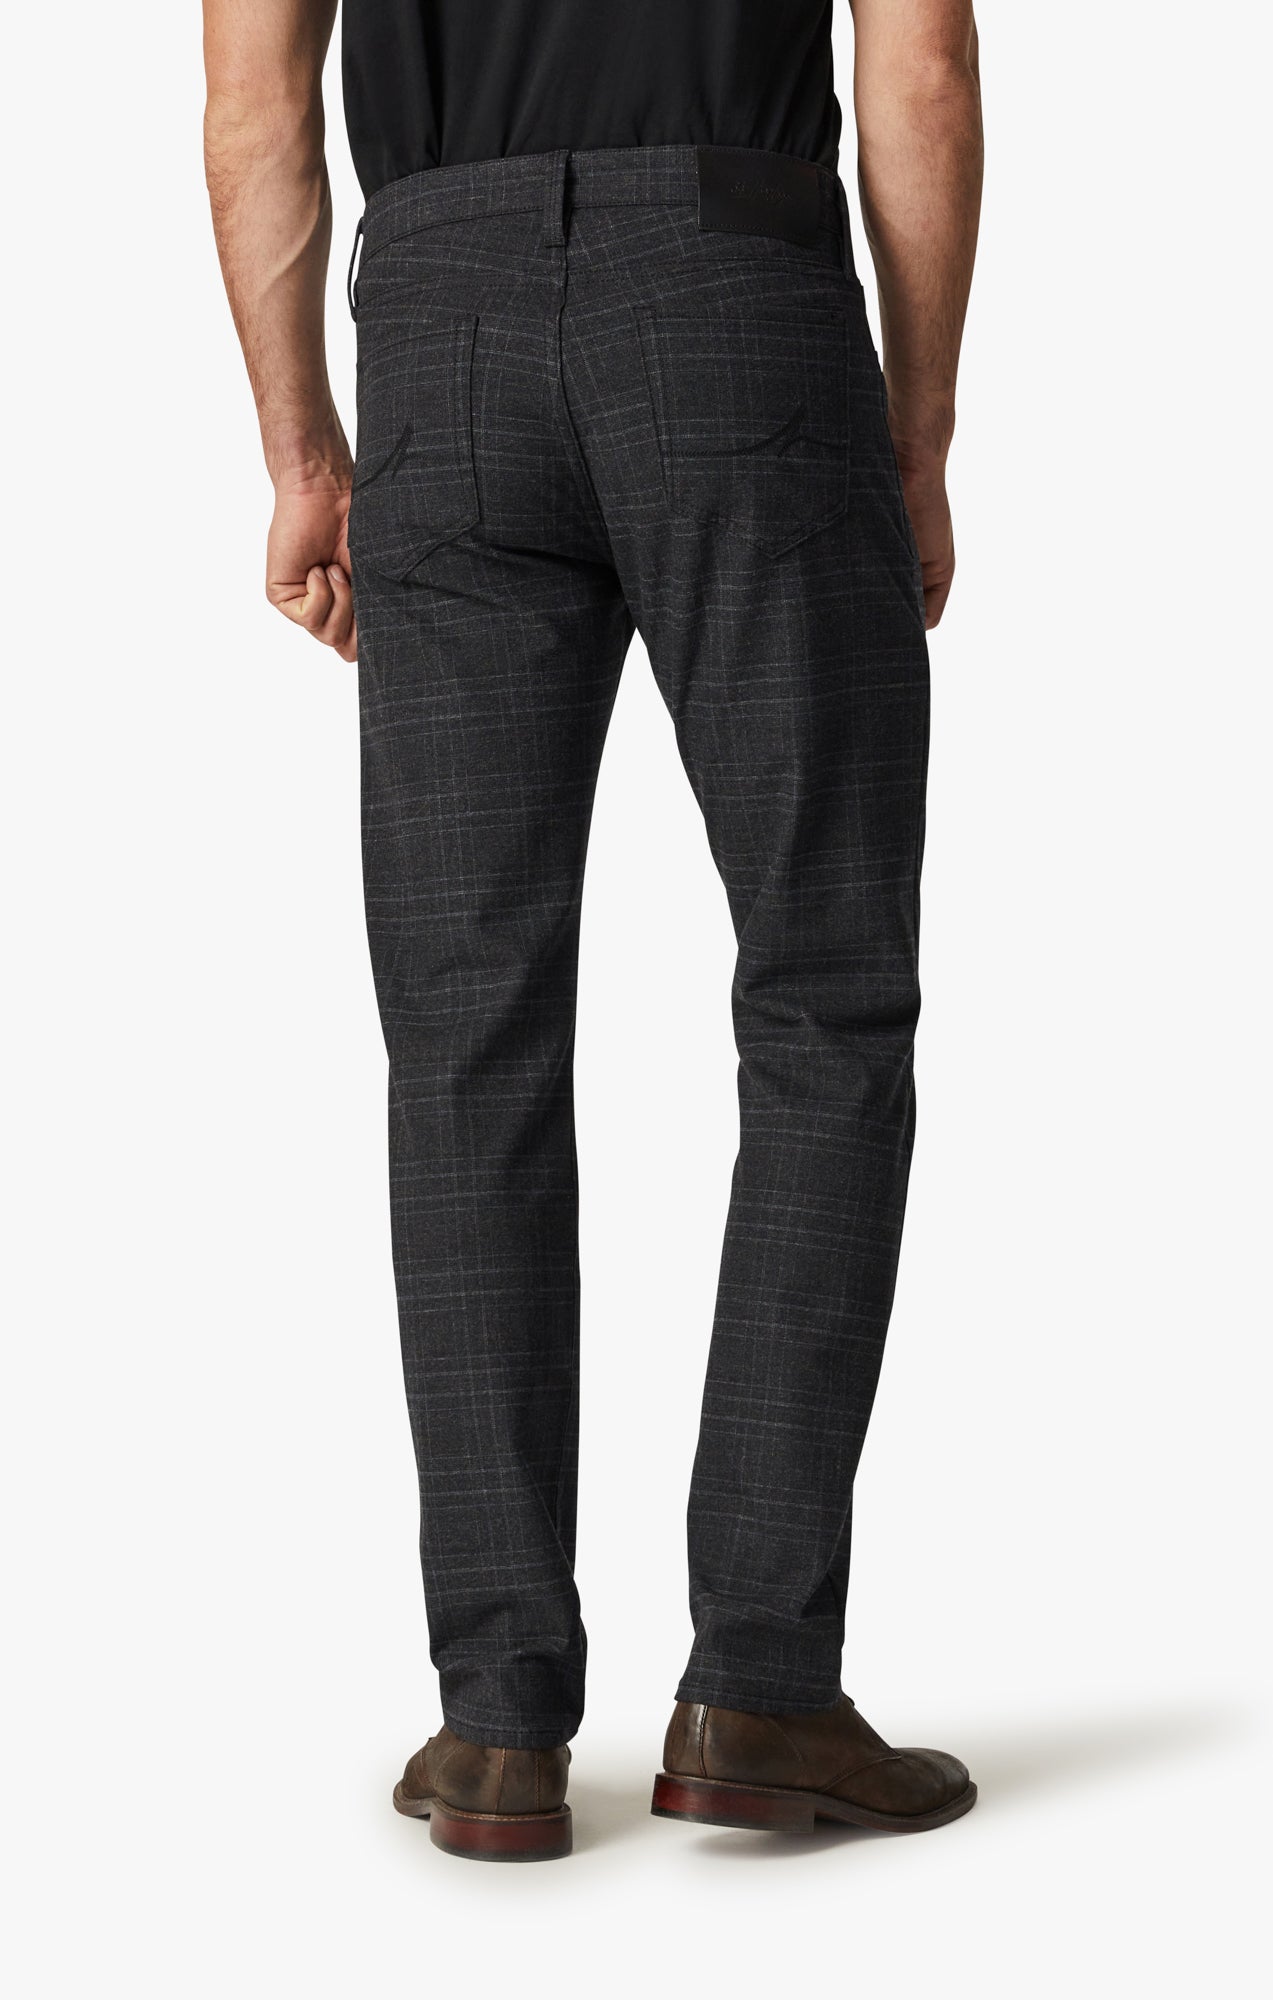 Courage Straight Leg Pants In Grey Checked Image 4